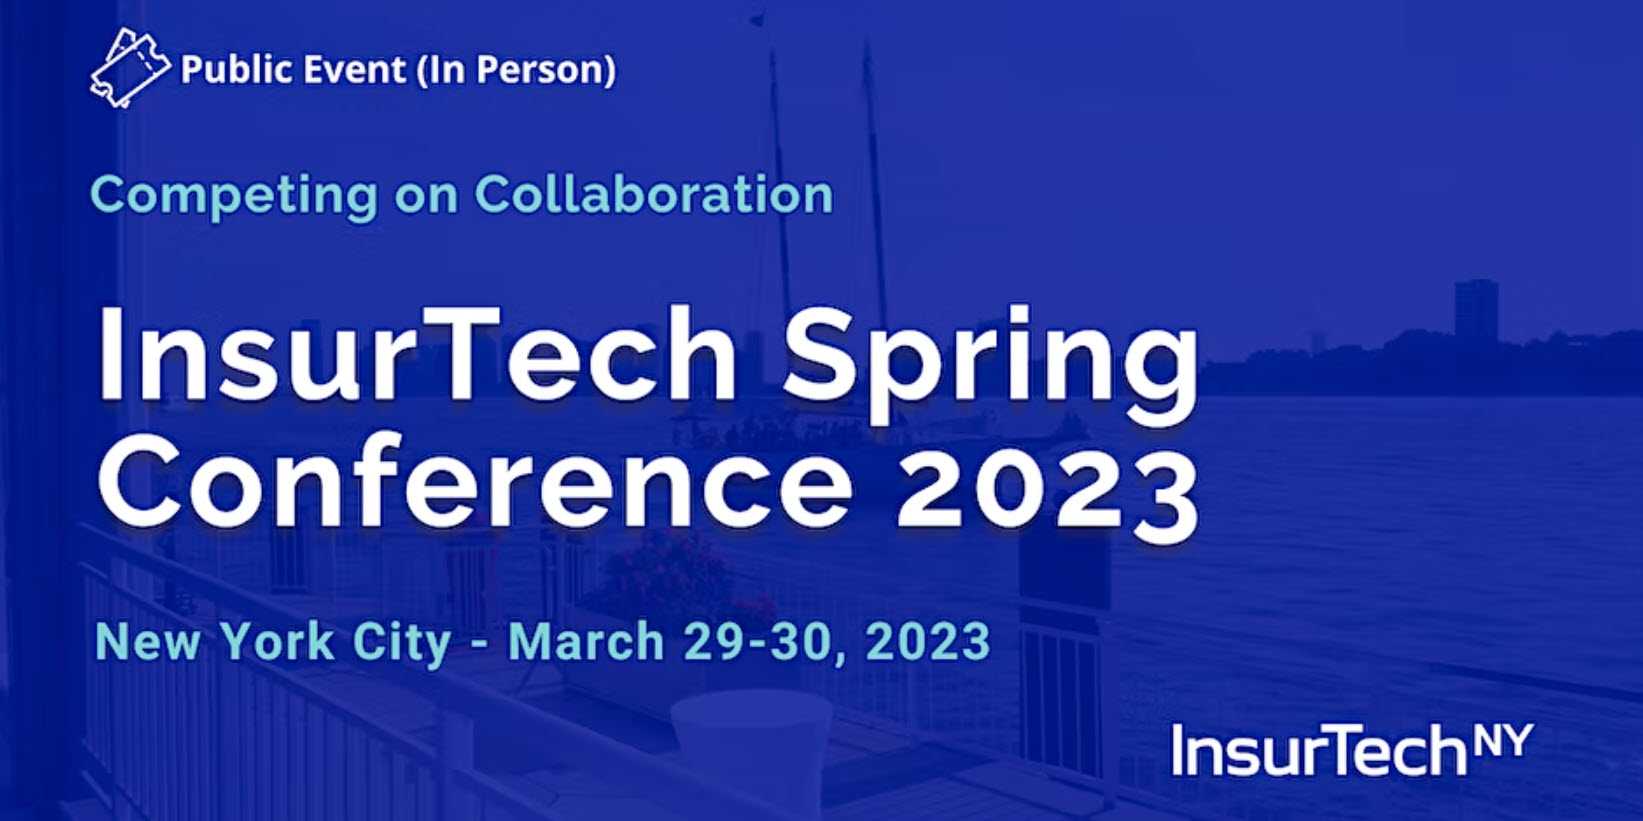 InsurTech Spring Conference 2023